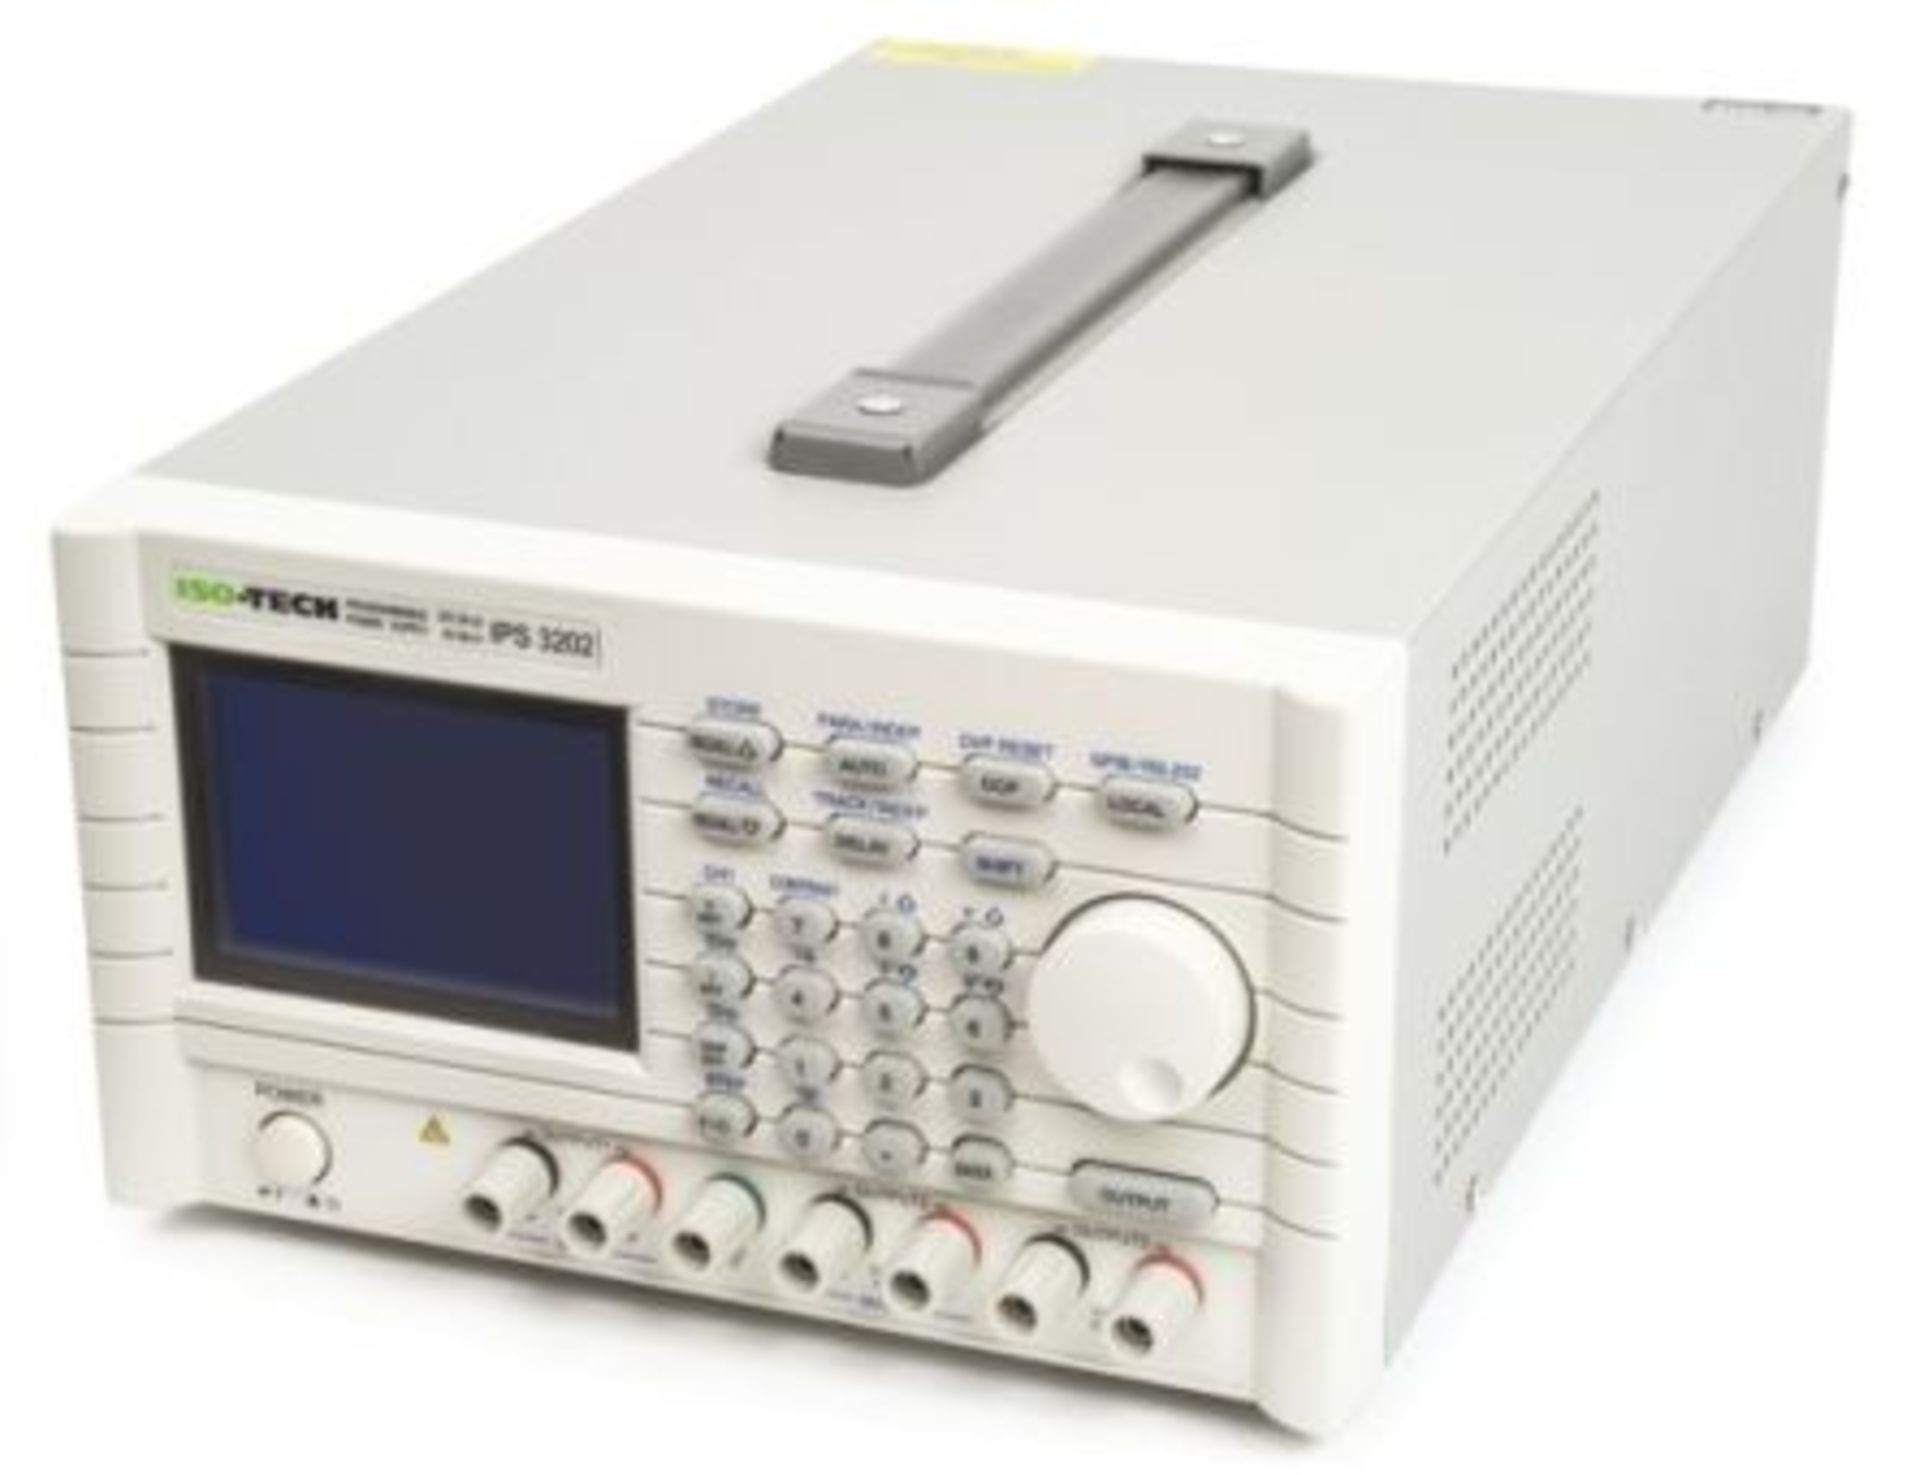 ISO-TECH IPS3202 Digital Bench Power Supply, 3 Output 0-32 V, 0-6 V 500 mA, 0- 2 A 158W - Image 2 of 4